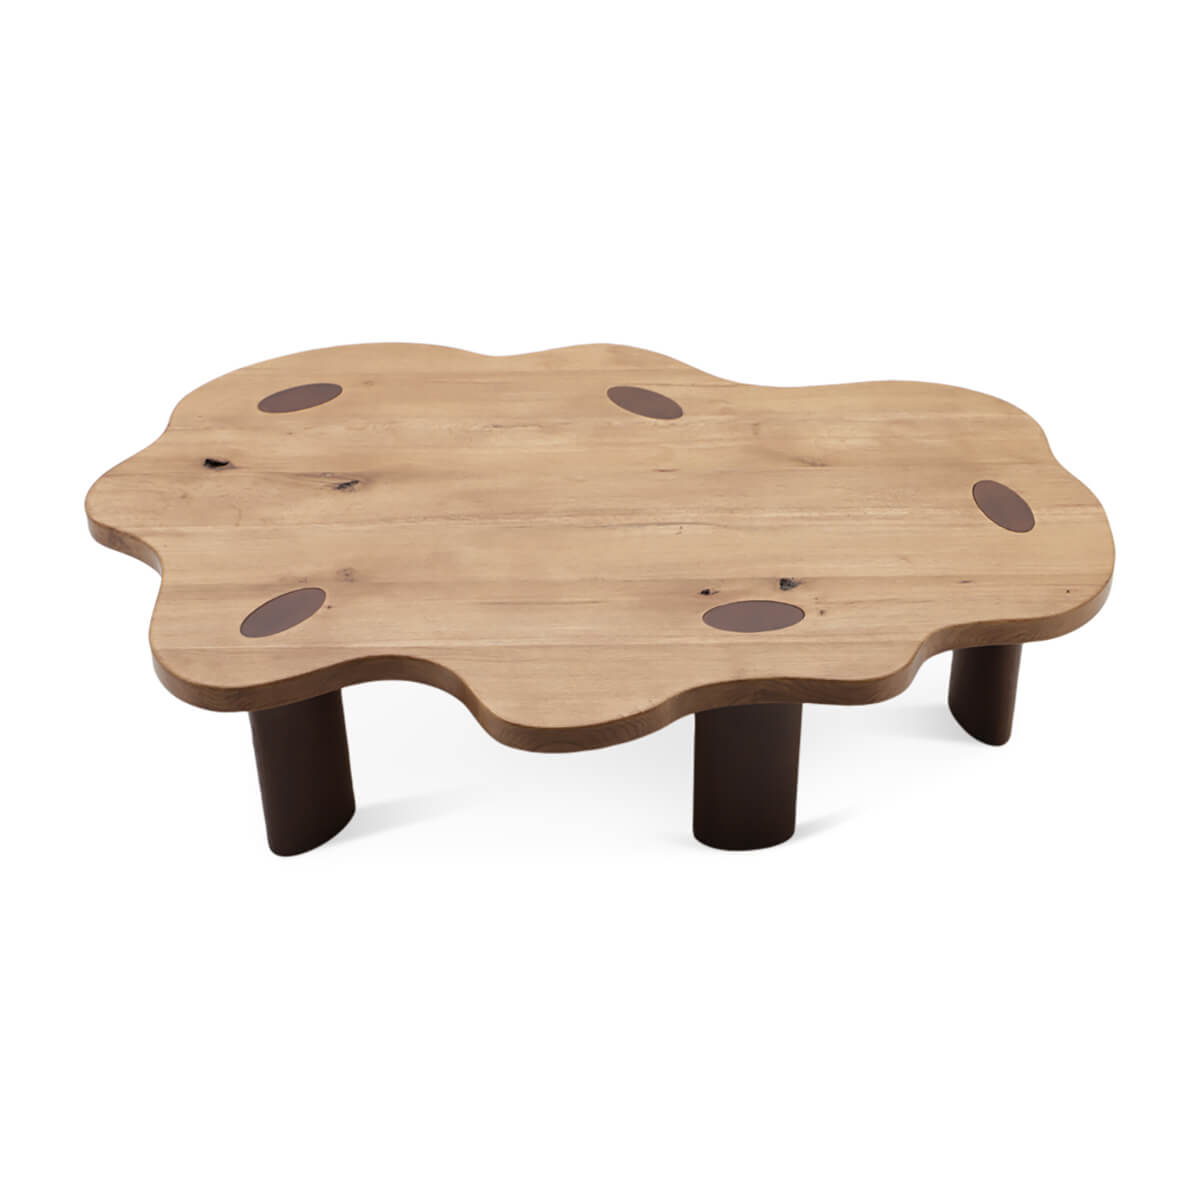 Amelie Wood Freeform Cloud Coffee Table - Large / Solid Oak with Walnut Stain